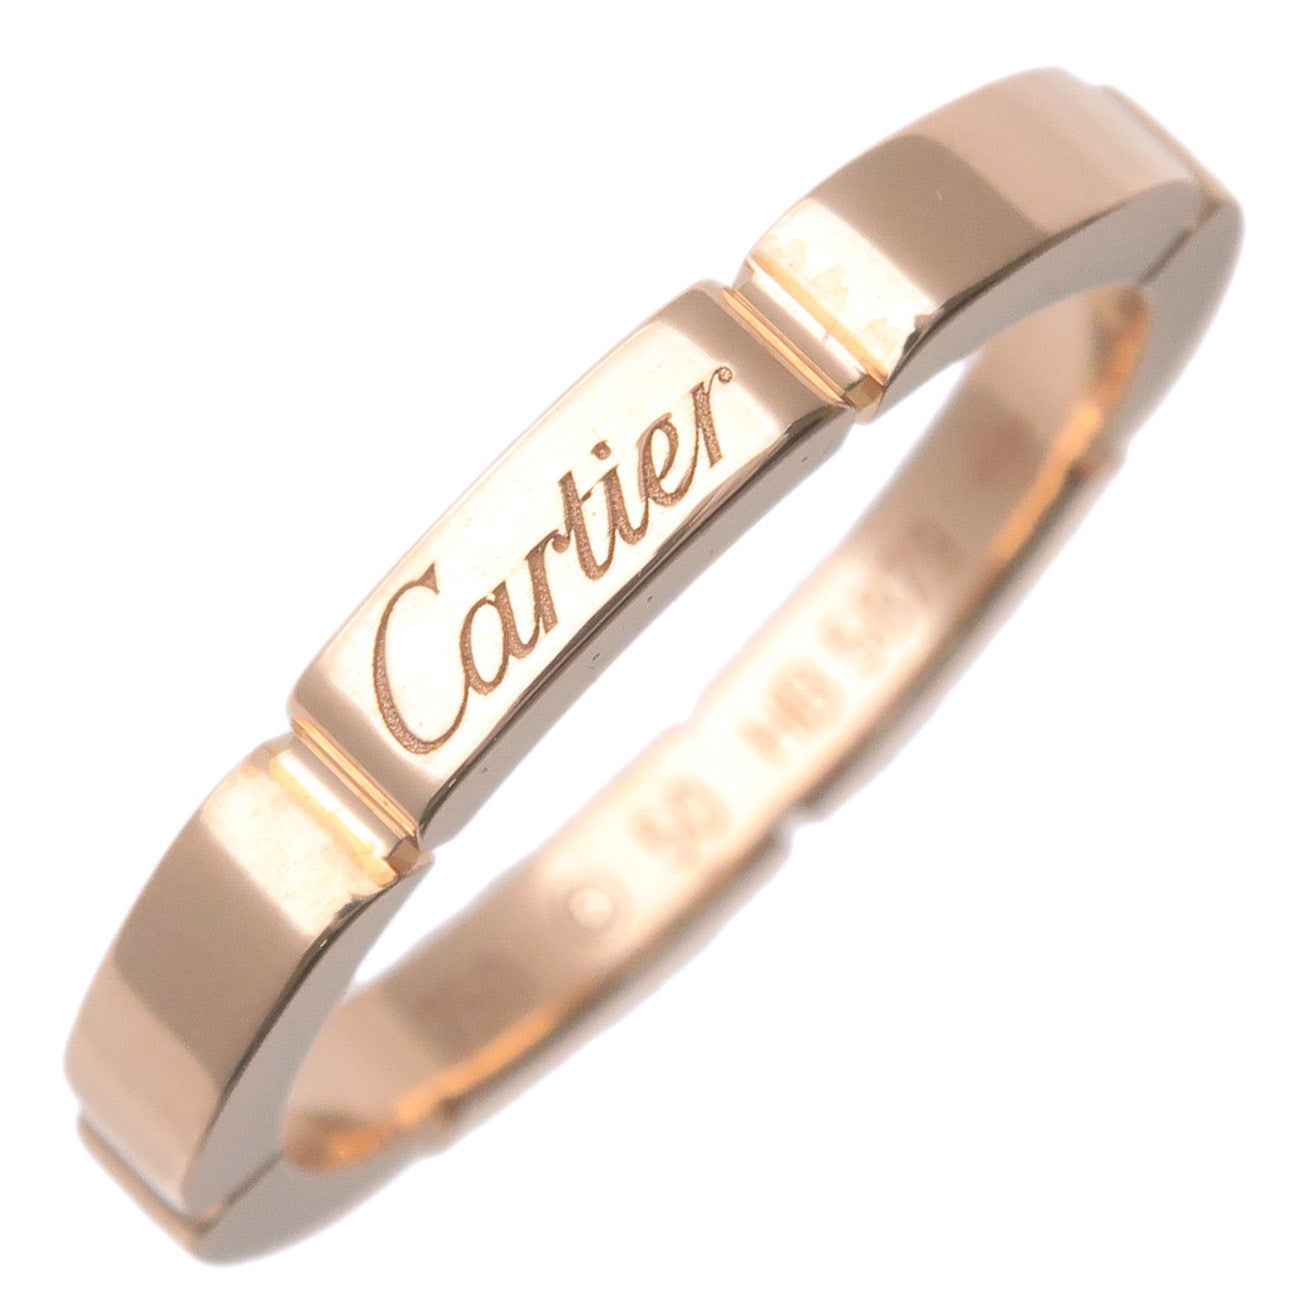 Cartier-Maillon-Panthere-Ring-K18-750PG-Rose-Gold-#50-US5.5